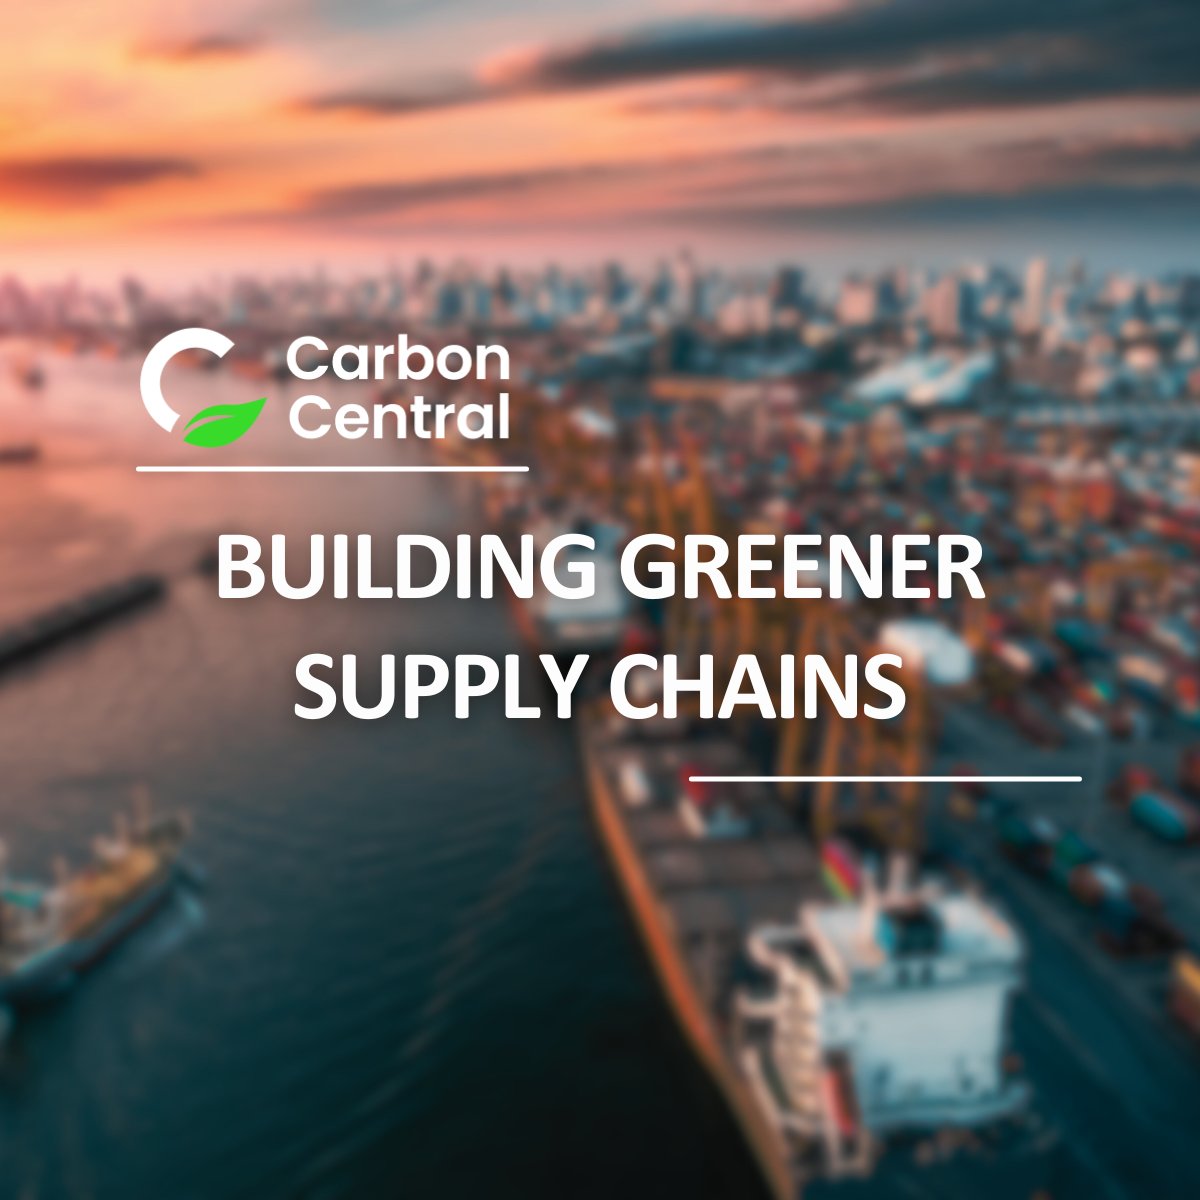 #CarbonCentral platform tracks and reports on #Sustainability throughout your #SupplyChain:tymlez.com/contact #CarbonReport #ClimateAction #GreenTech #Innovation #GreenBusiness #CarbonNeutral #CleanTech #GreenEconomy #CorporateSustainability #EnvironmentalImpact #TYMLEZ $NVQ